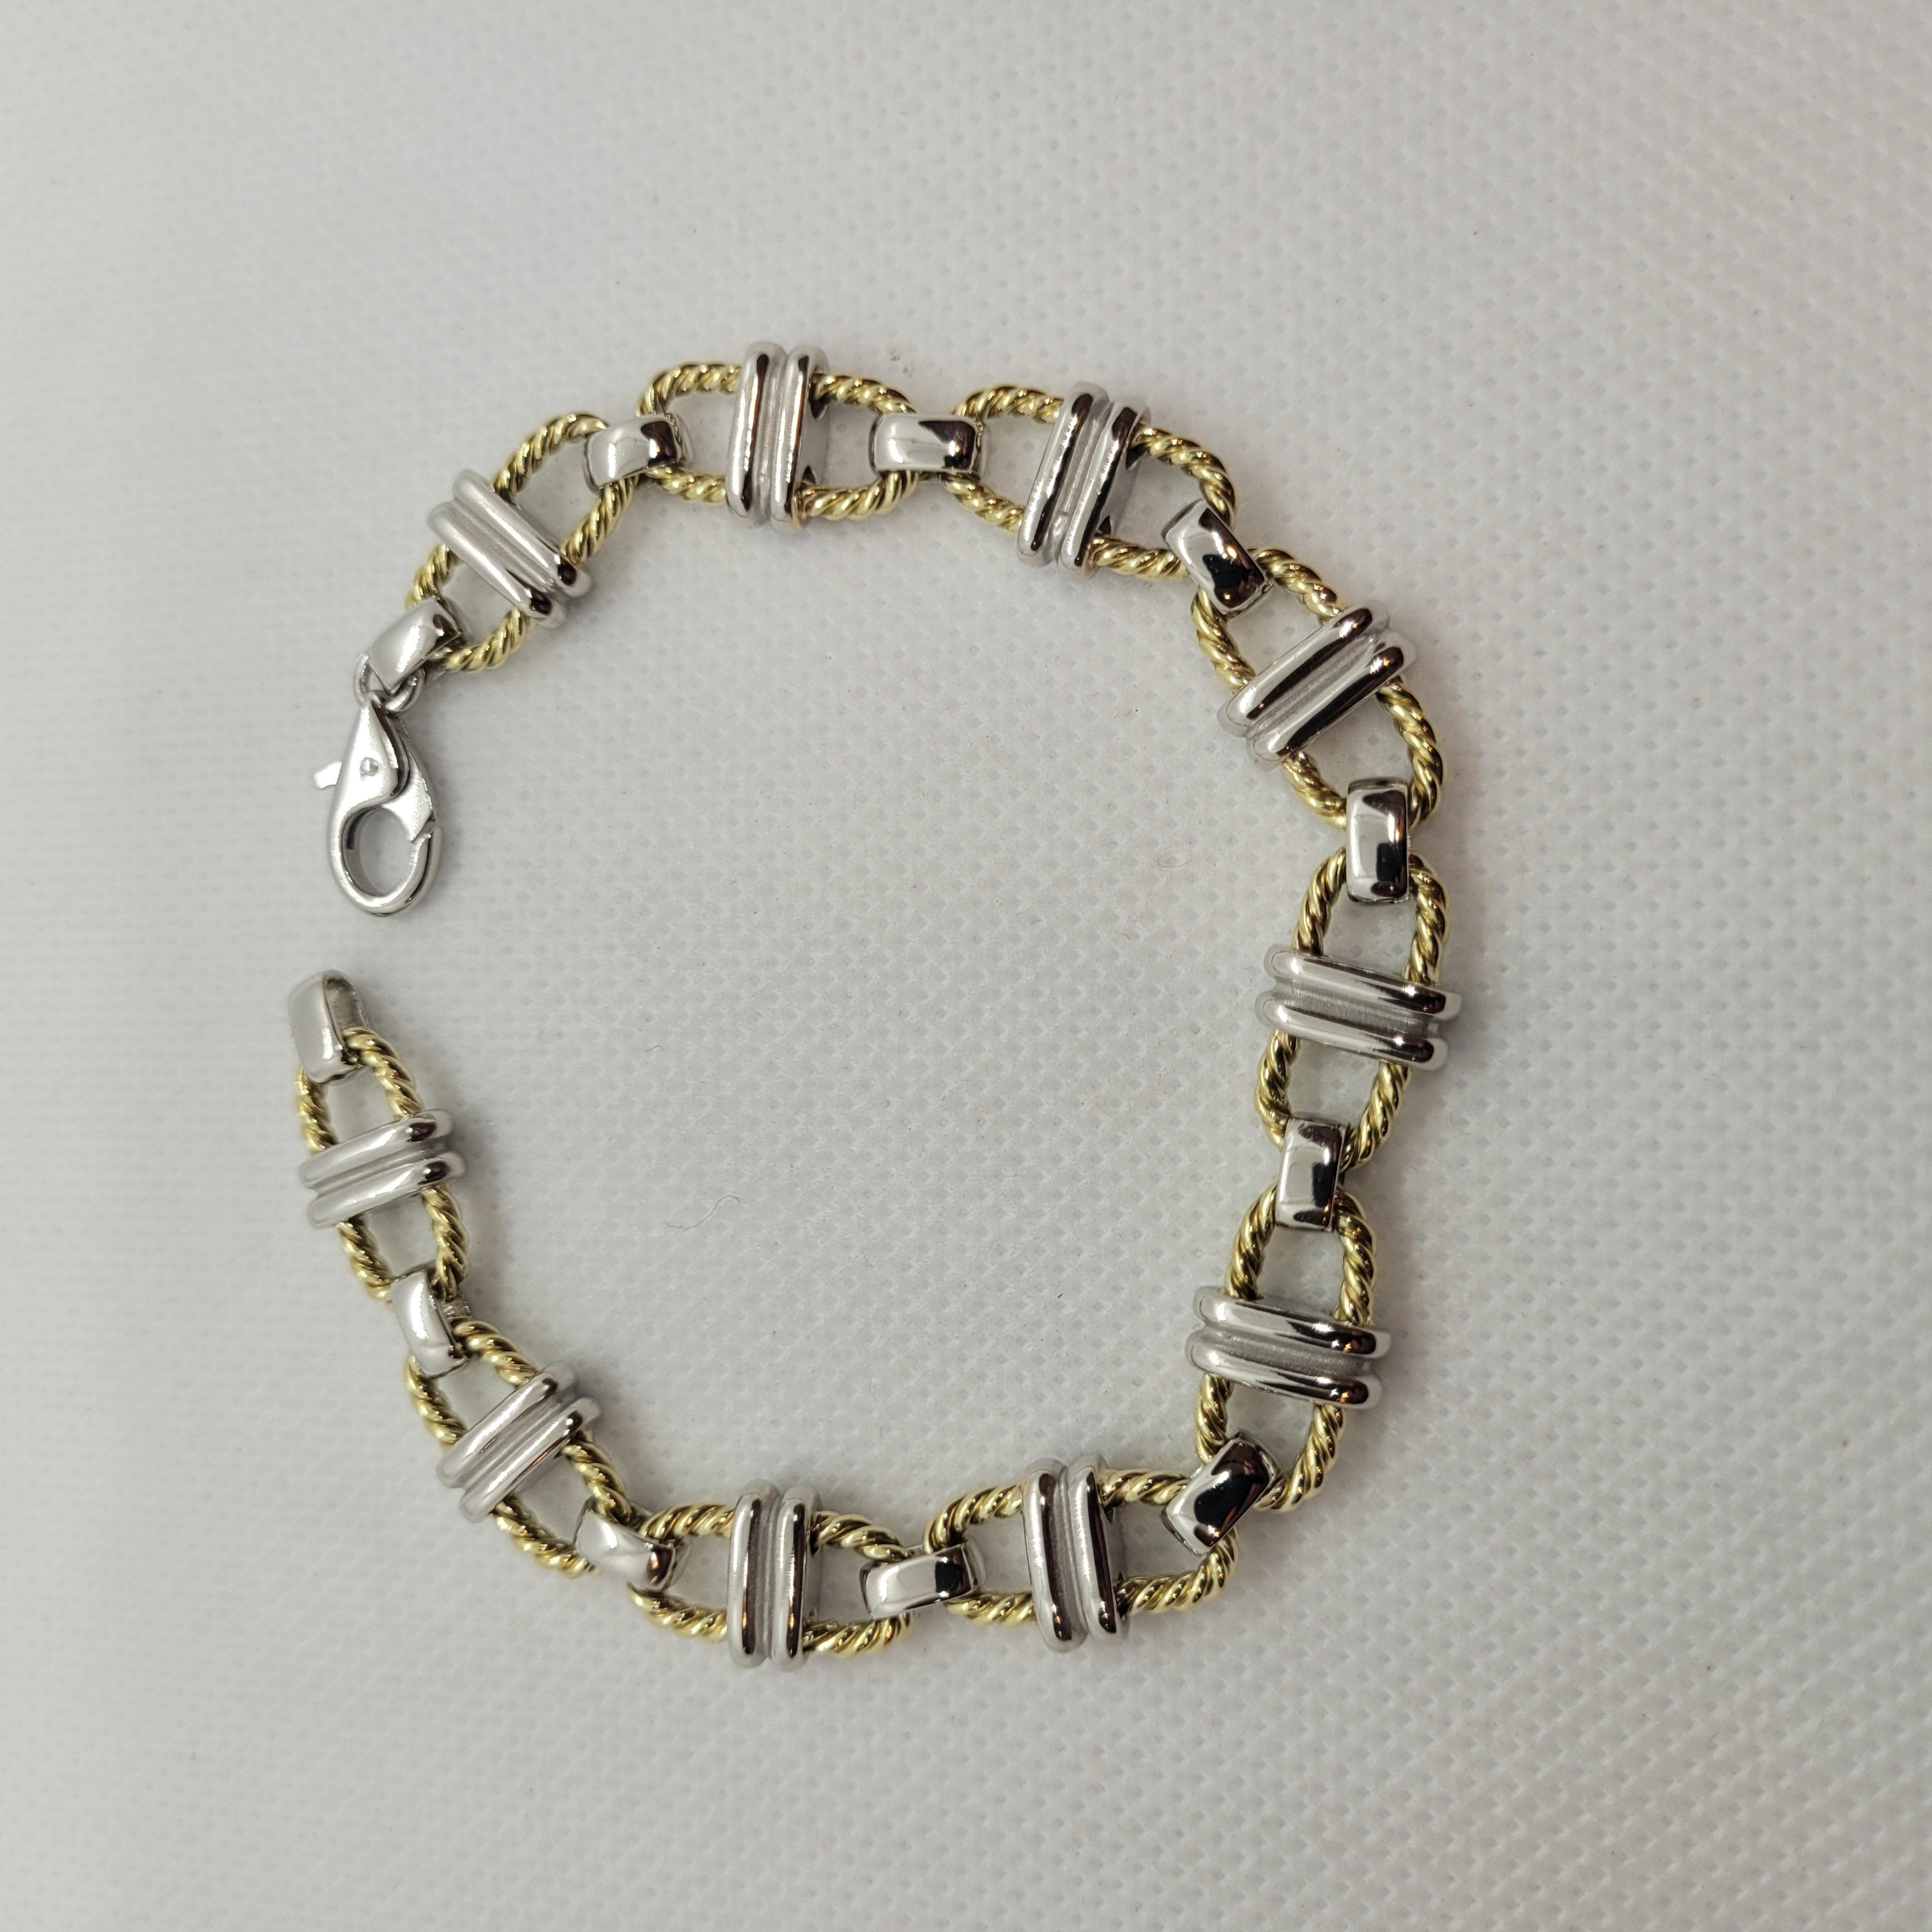 Platinum 18kt Yellow Gold  Anchor Link Bracelet, Handmade, Twisted Design, Satin In Excellent Condition For Sale In Rancho Santa Fe, CA